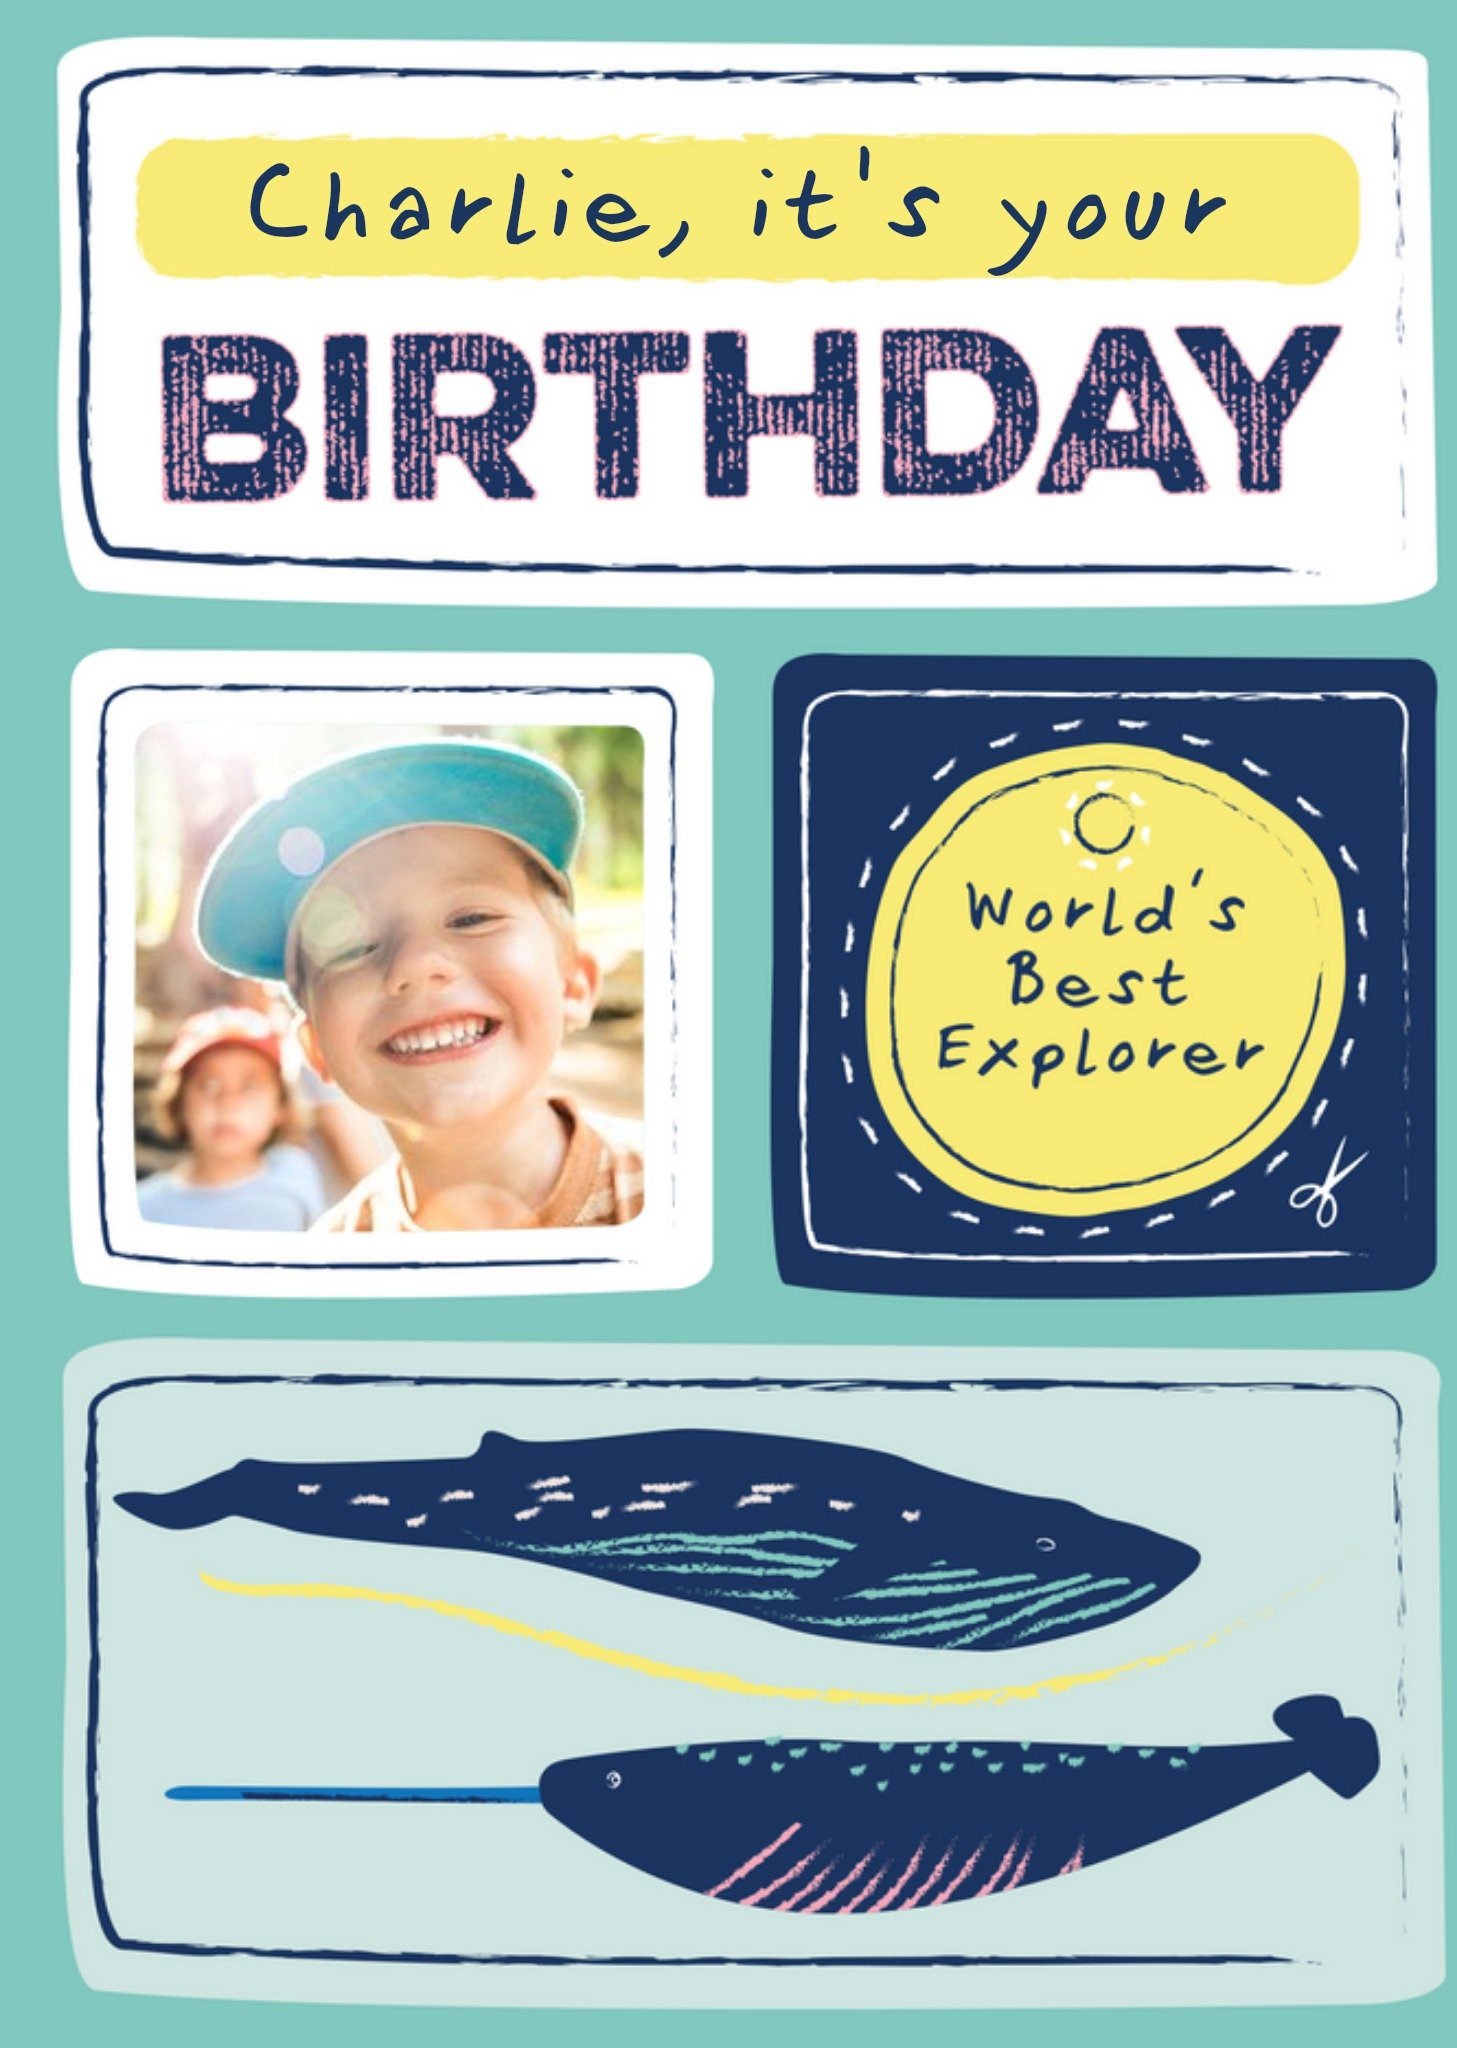 The Natural History Museum Natural History Museum Whale Photo Upload Birthday Card, Large